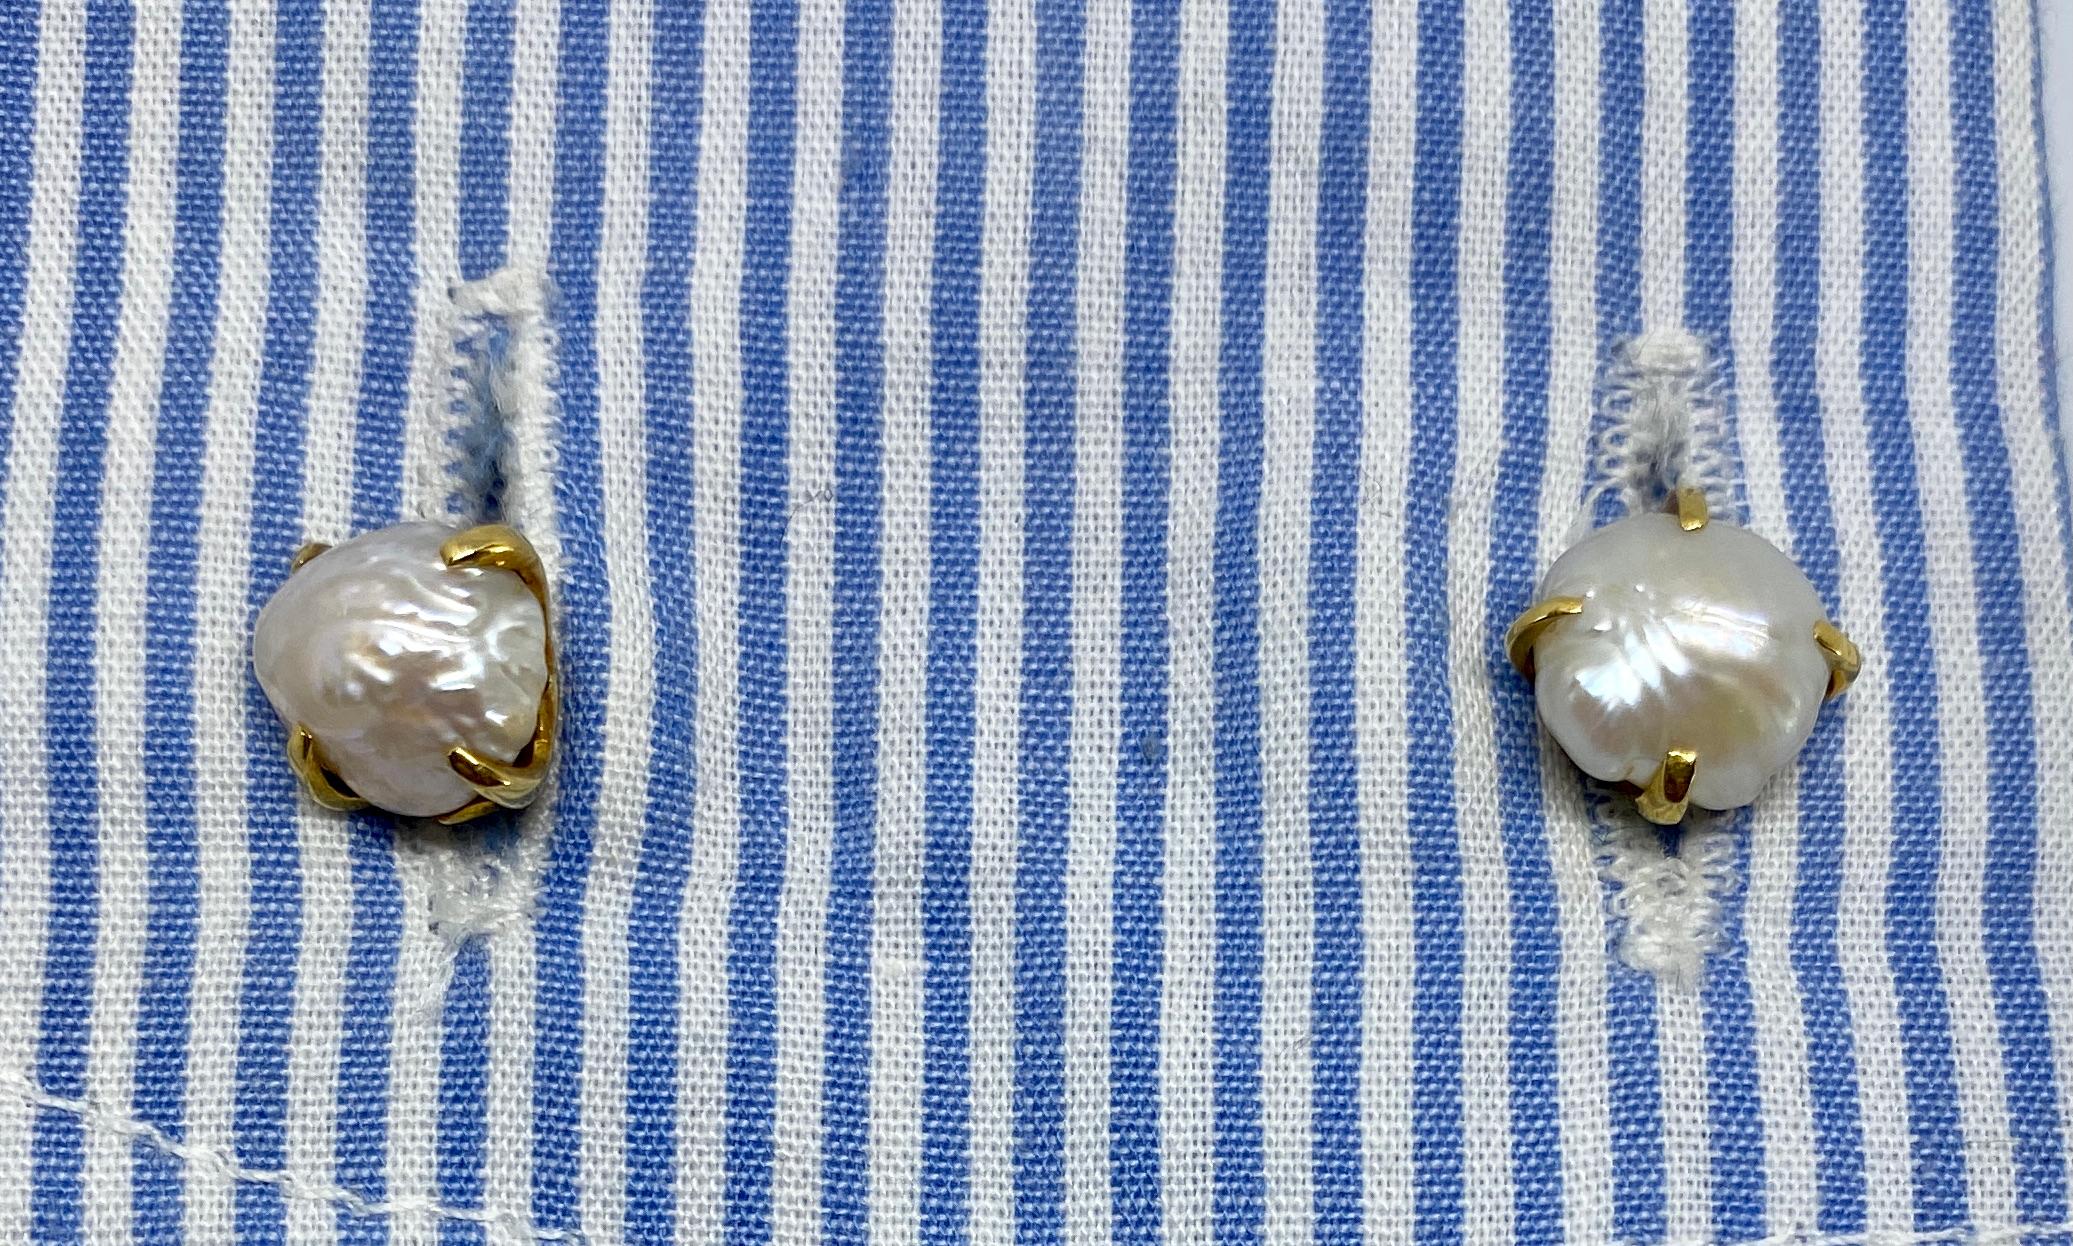 A pair of antique cufflinks in yellow gold by Tiffany & Co featuring four natural river pearls.

Natural river pearls are extremely rare and highly sought-after by pearl connoisseurs and collectors. These cufflinks feature four, ranging in size from